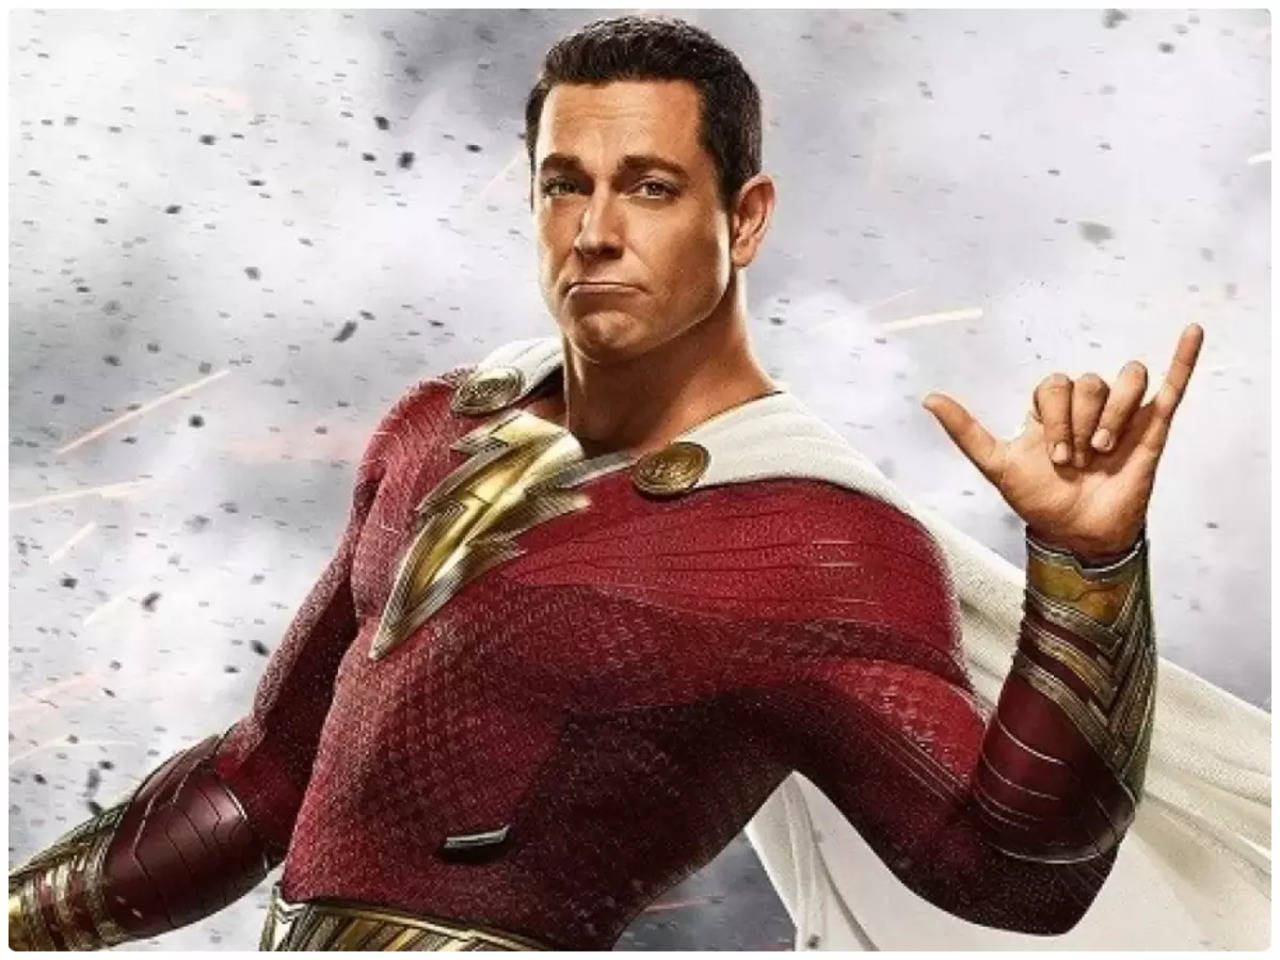 How is Shazam! Fury of the Gods doing at the box office? - Quora